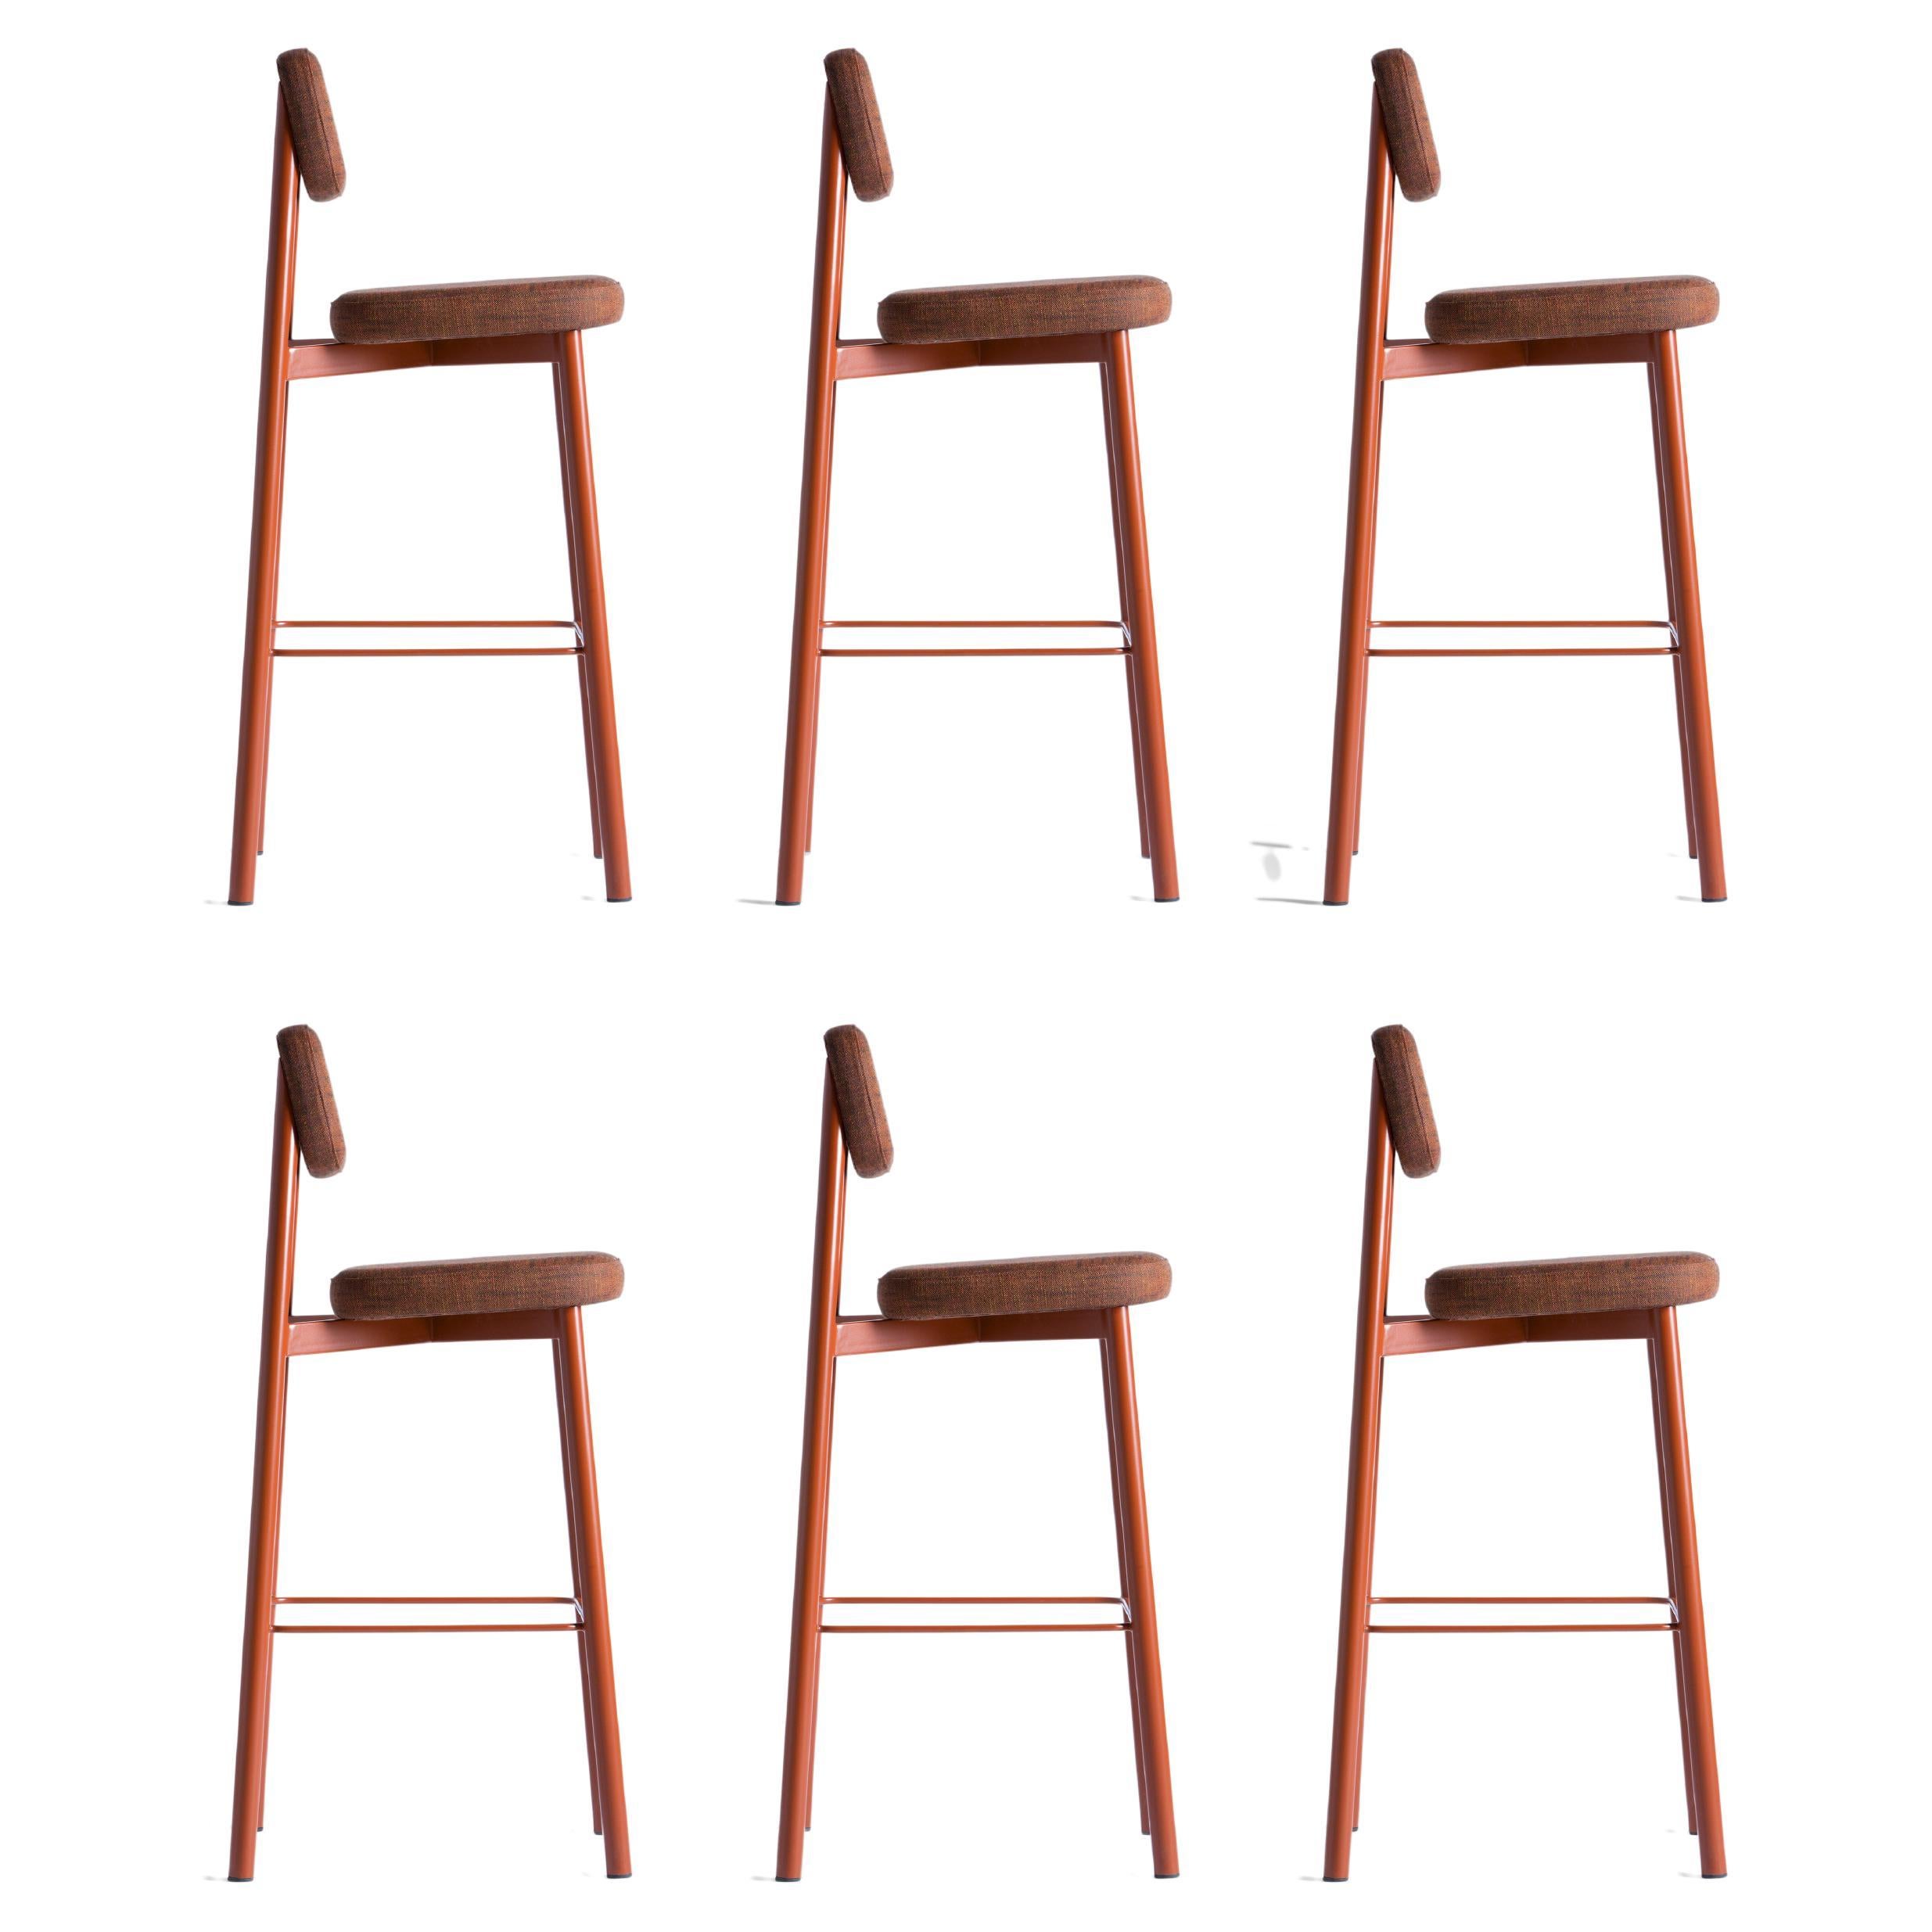 Set of 6 Brick Red Residence 75 Counter Chairs by Kann Design